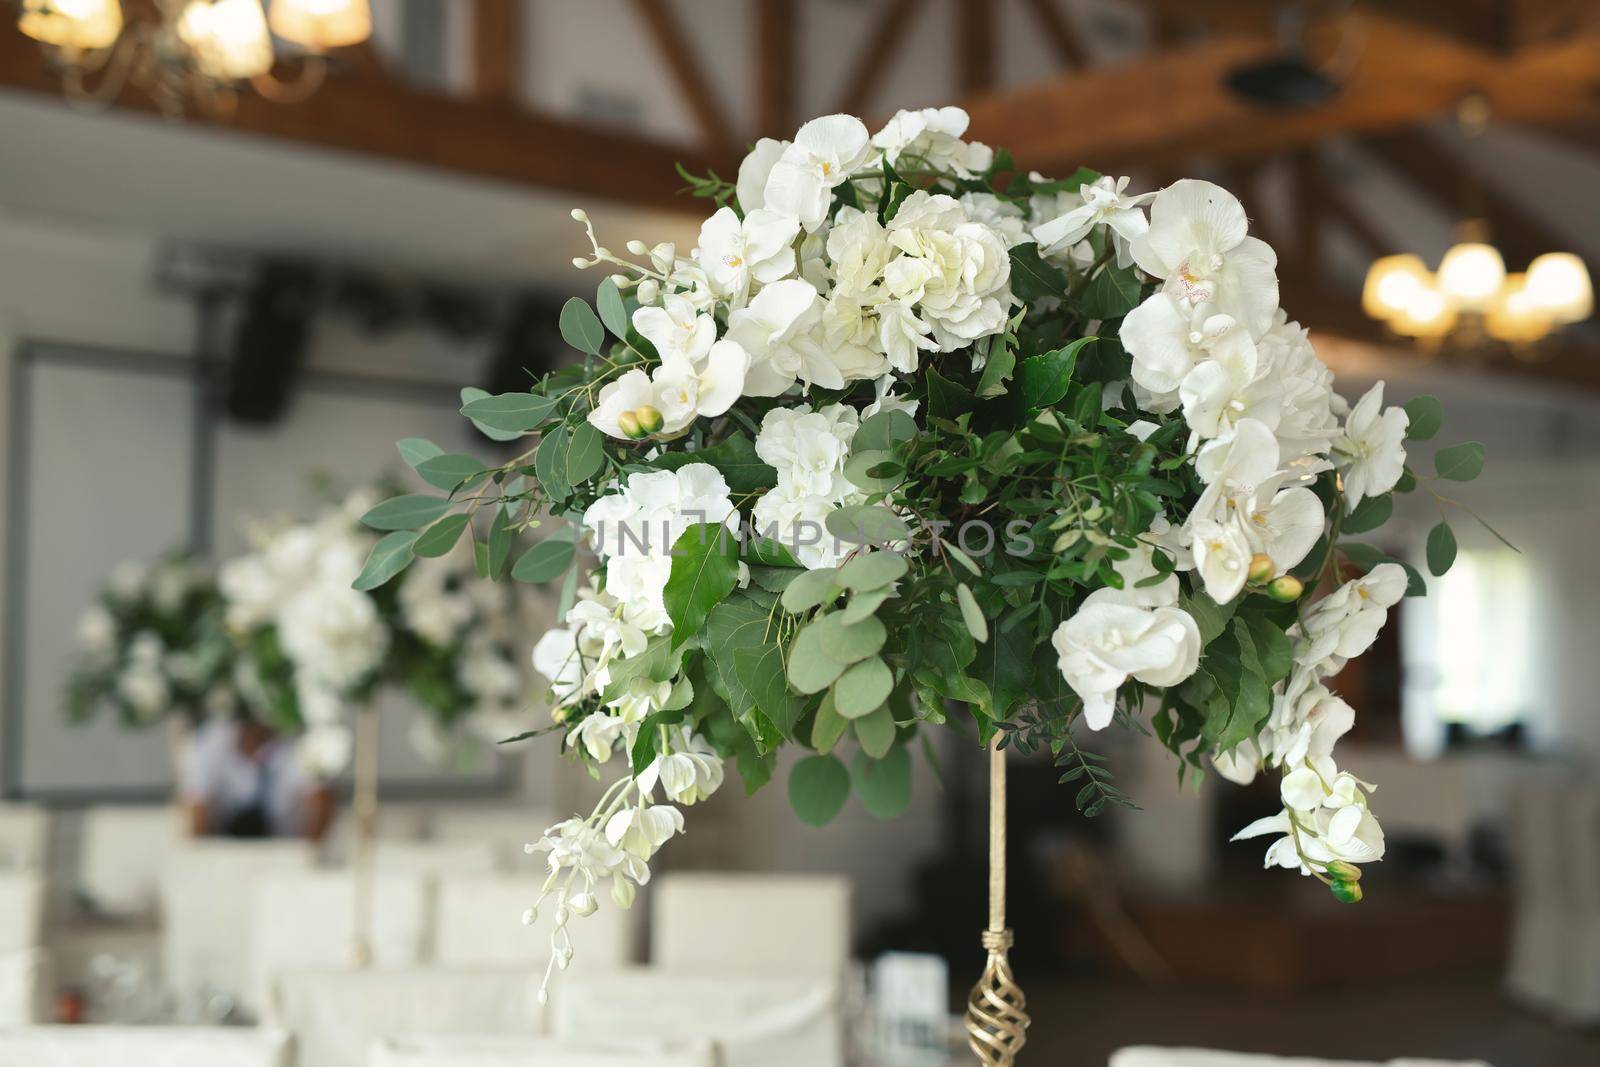 Wedding floral decor in white at a banquet in a restaurant by StudioPeace